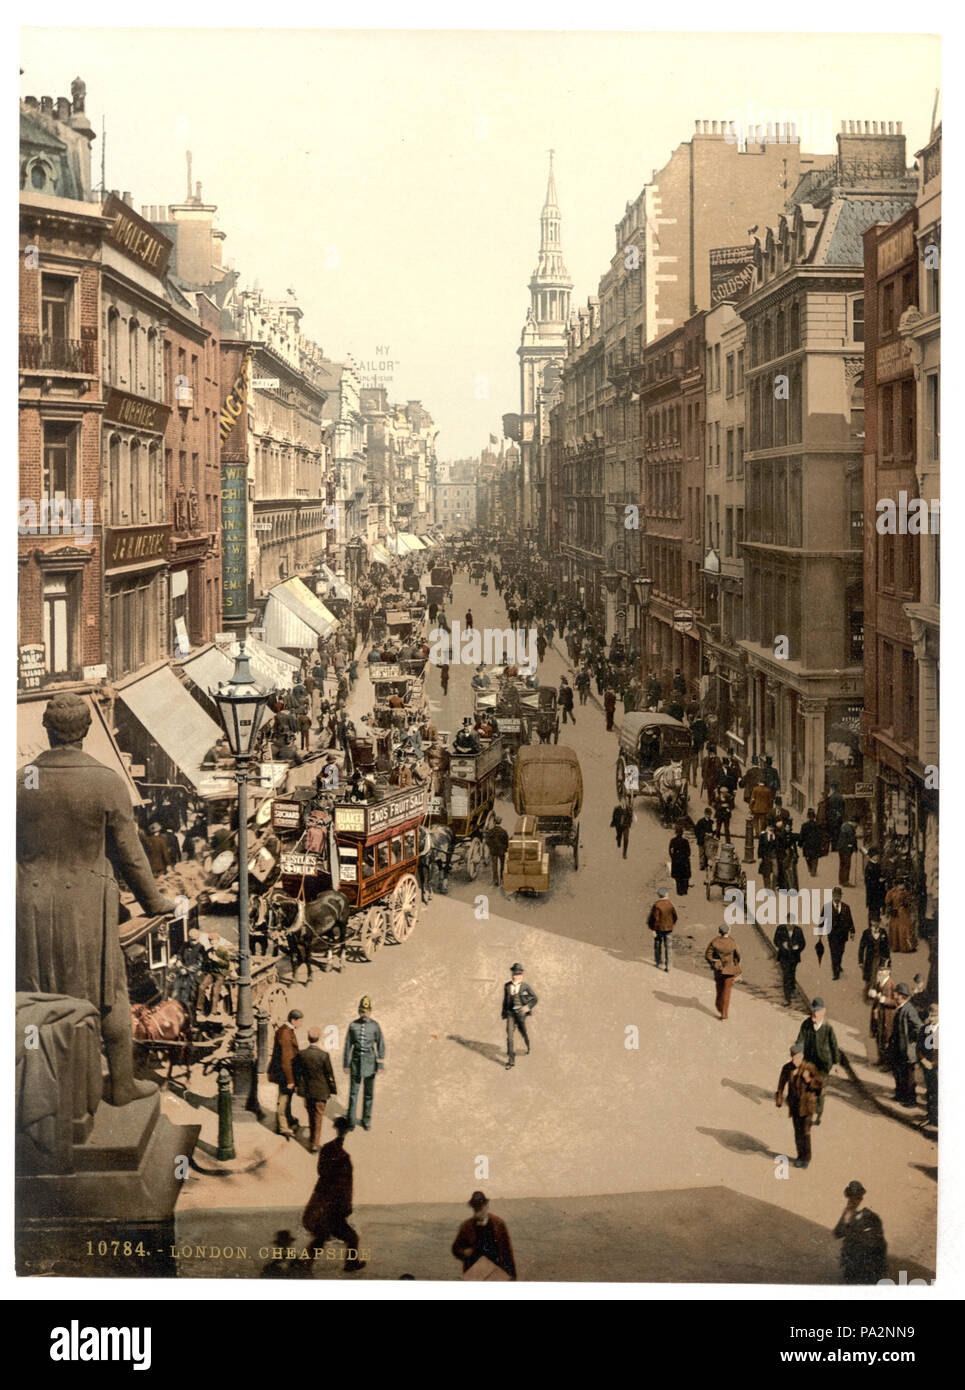 Cheapside, Londres, Angleterre 1 impression photomécanique : photochrom.  couleur, entre 1890 et 1900 302 Cheapside photochrom Photo Stock - Alamy